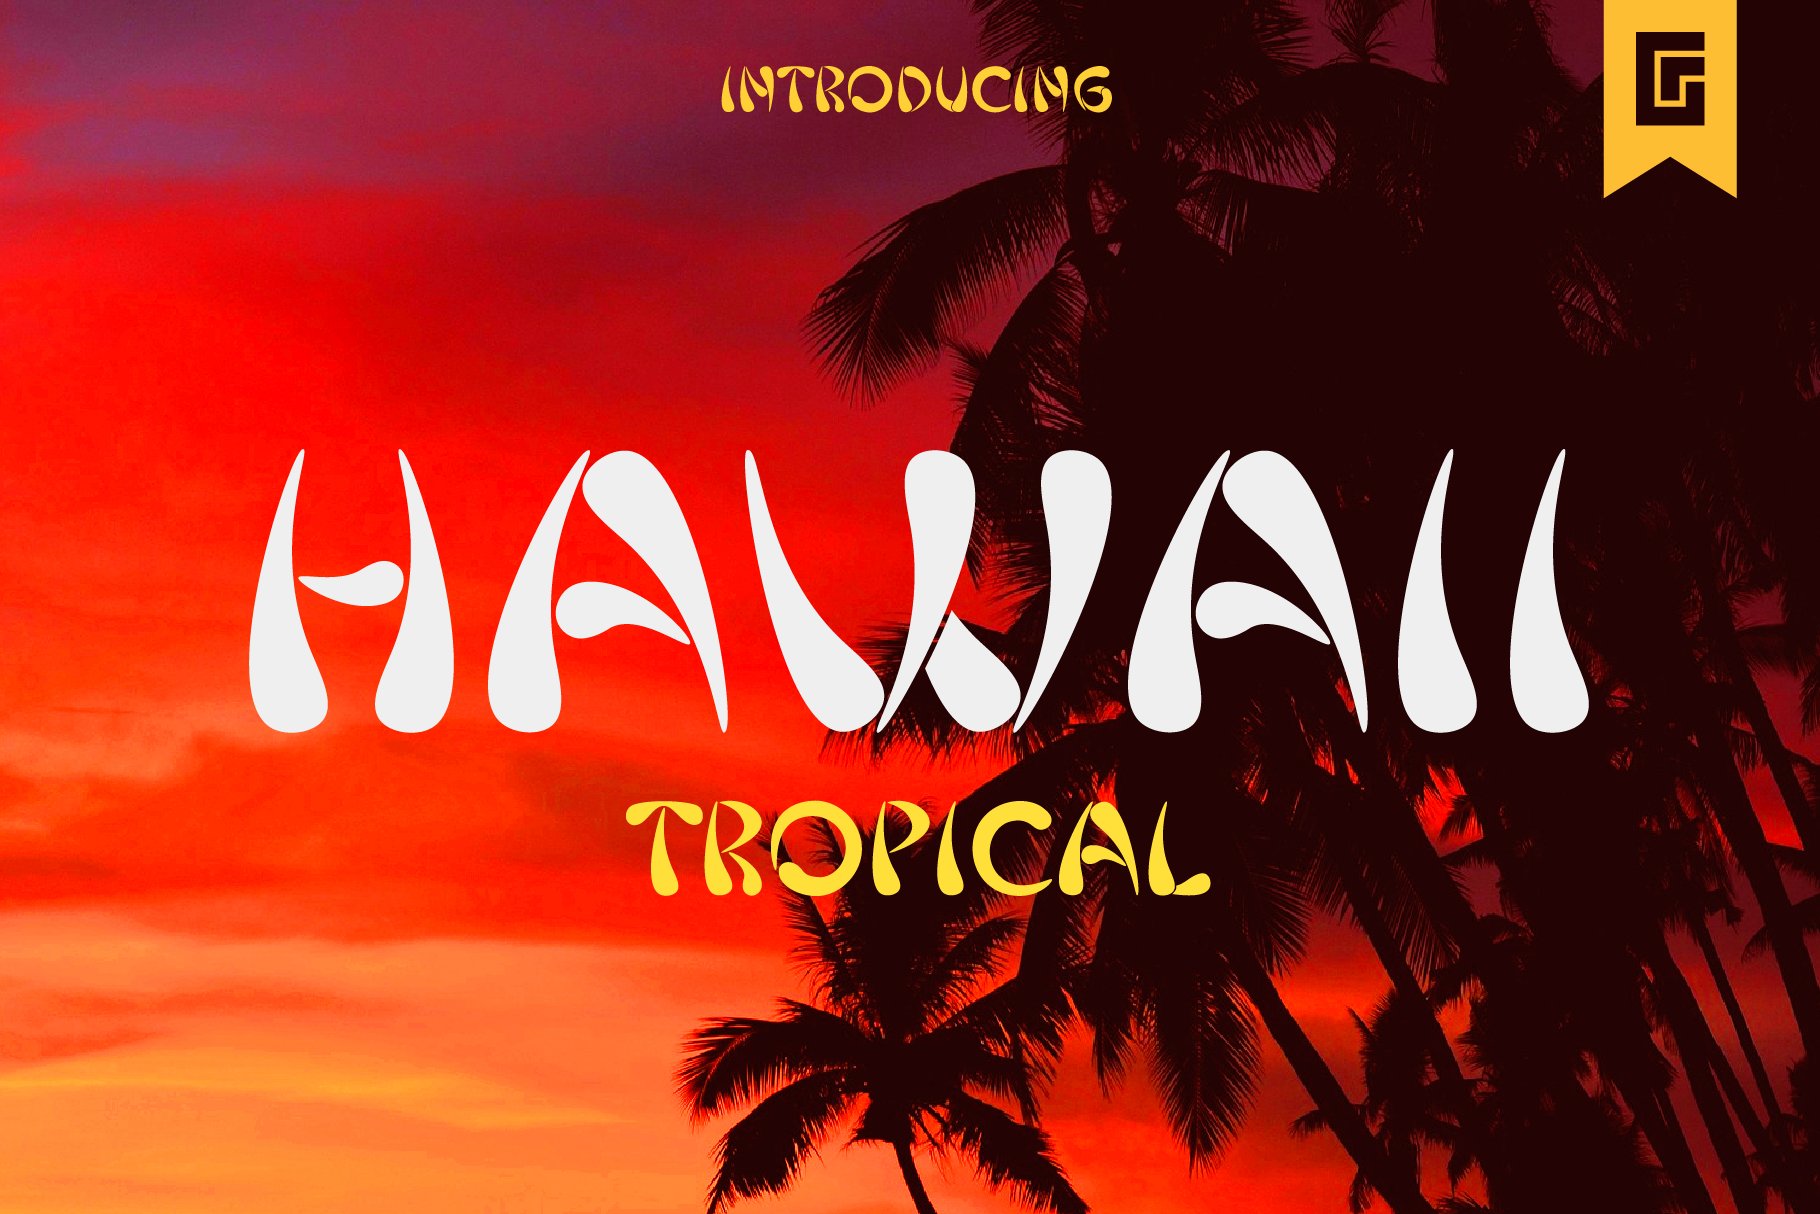 Hawaii Tropical cover image.